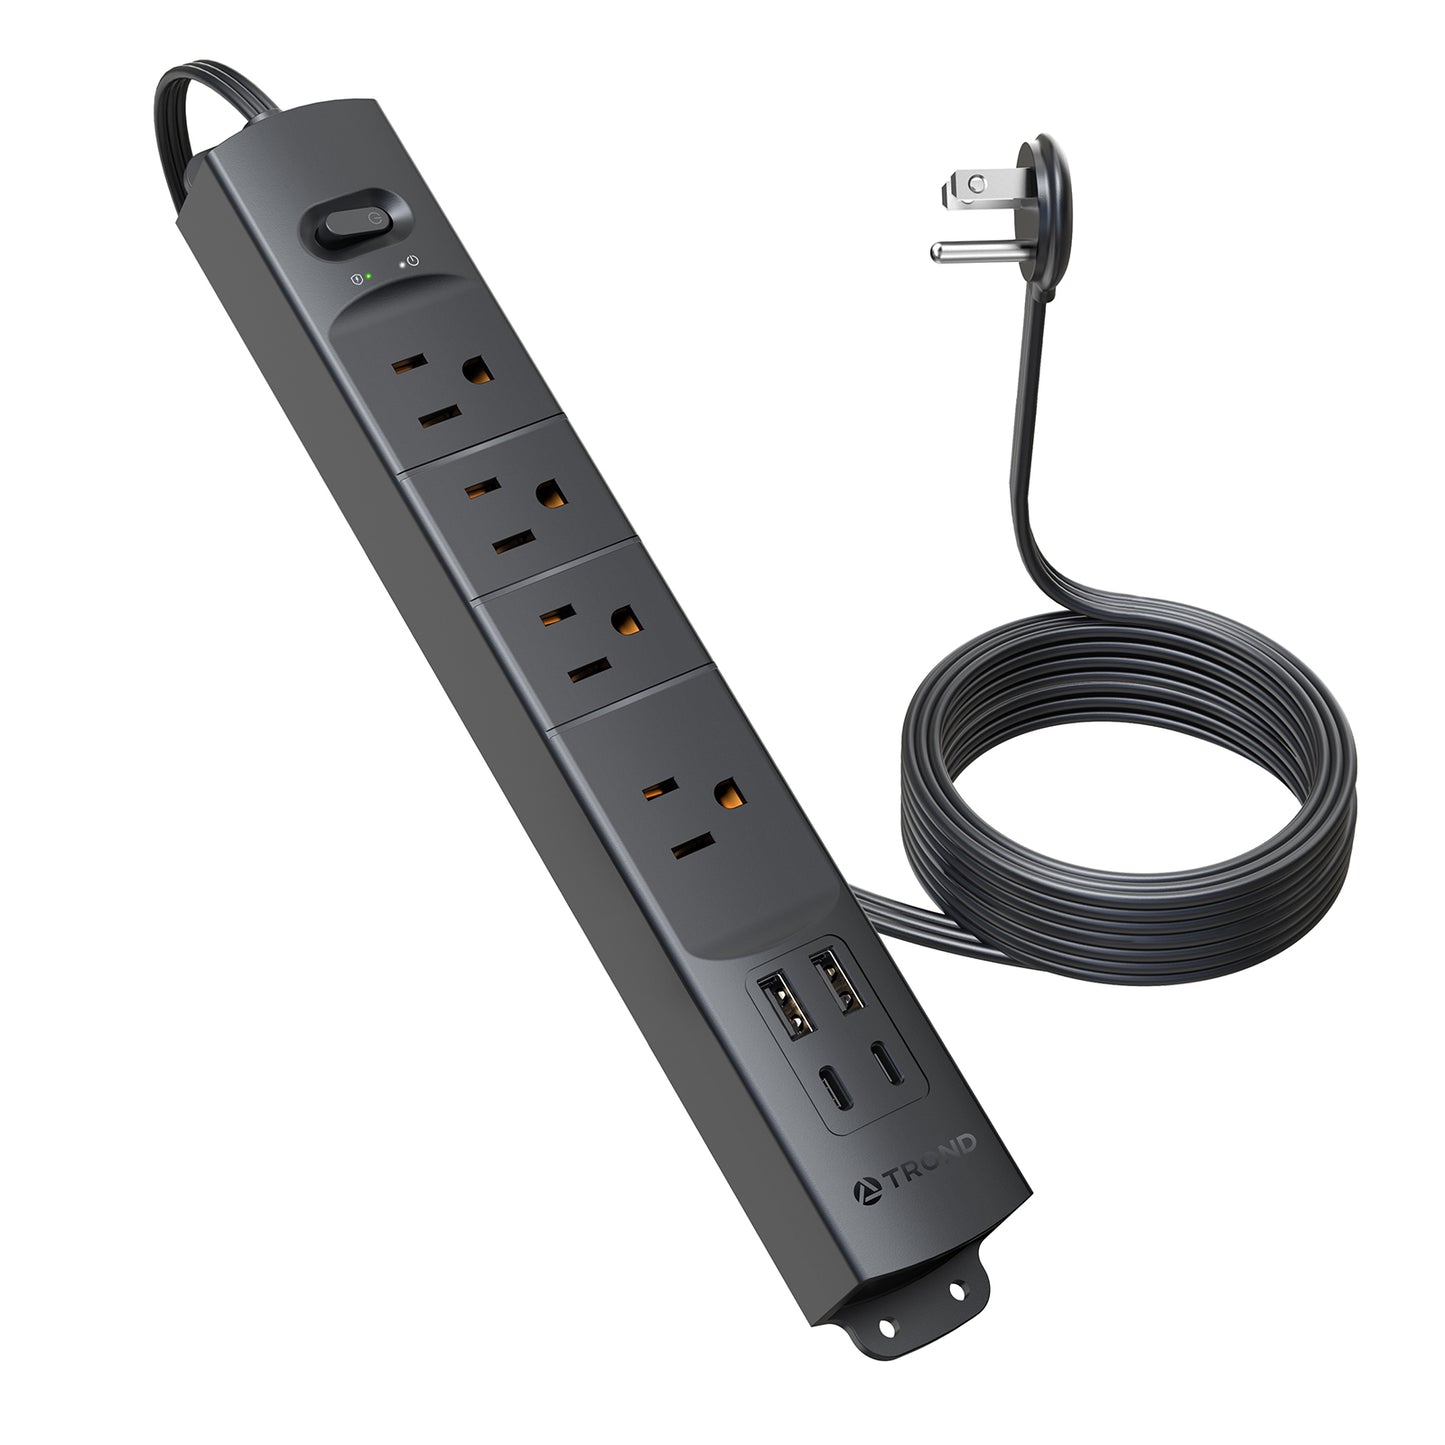 Surge Protector Power Strip with USB 4 AC Outlets and 1440J Surge Protection